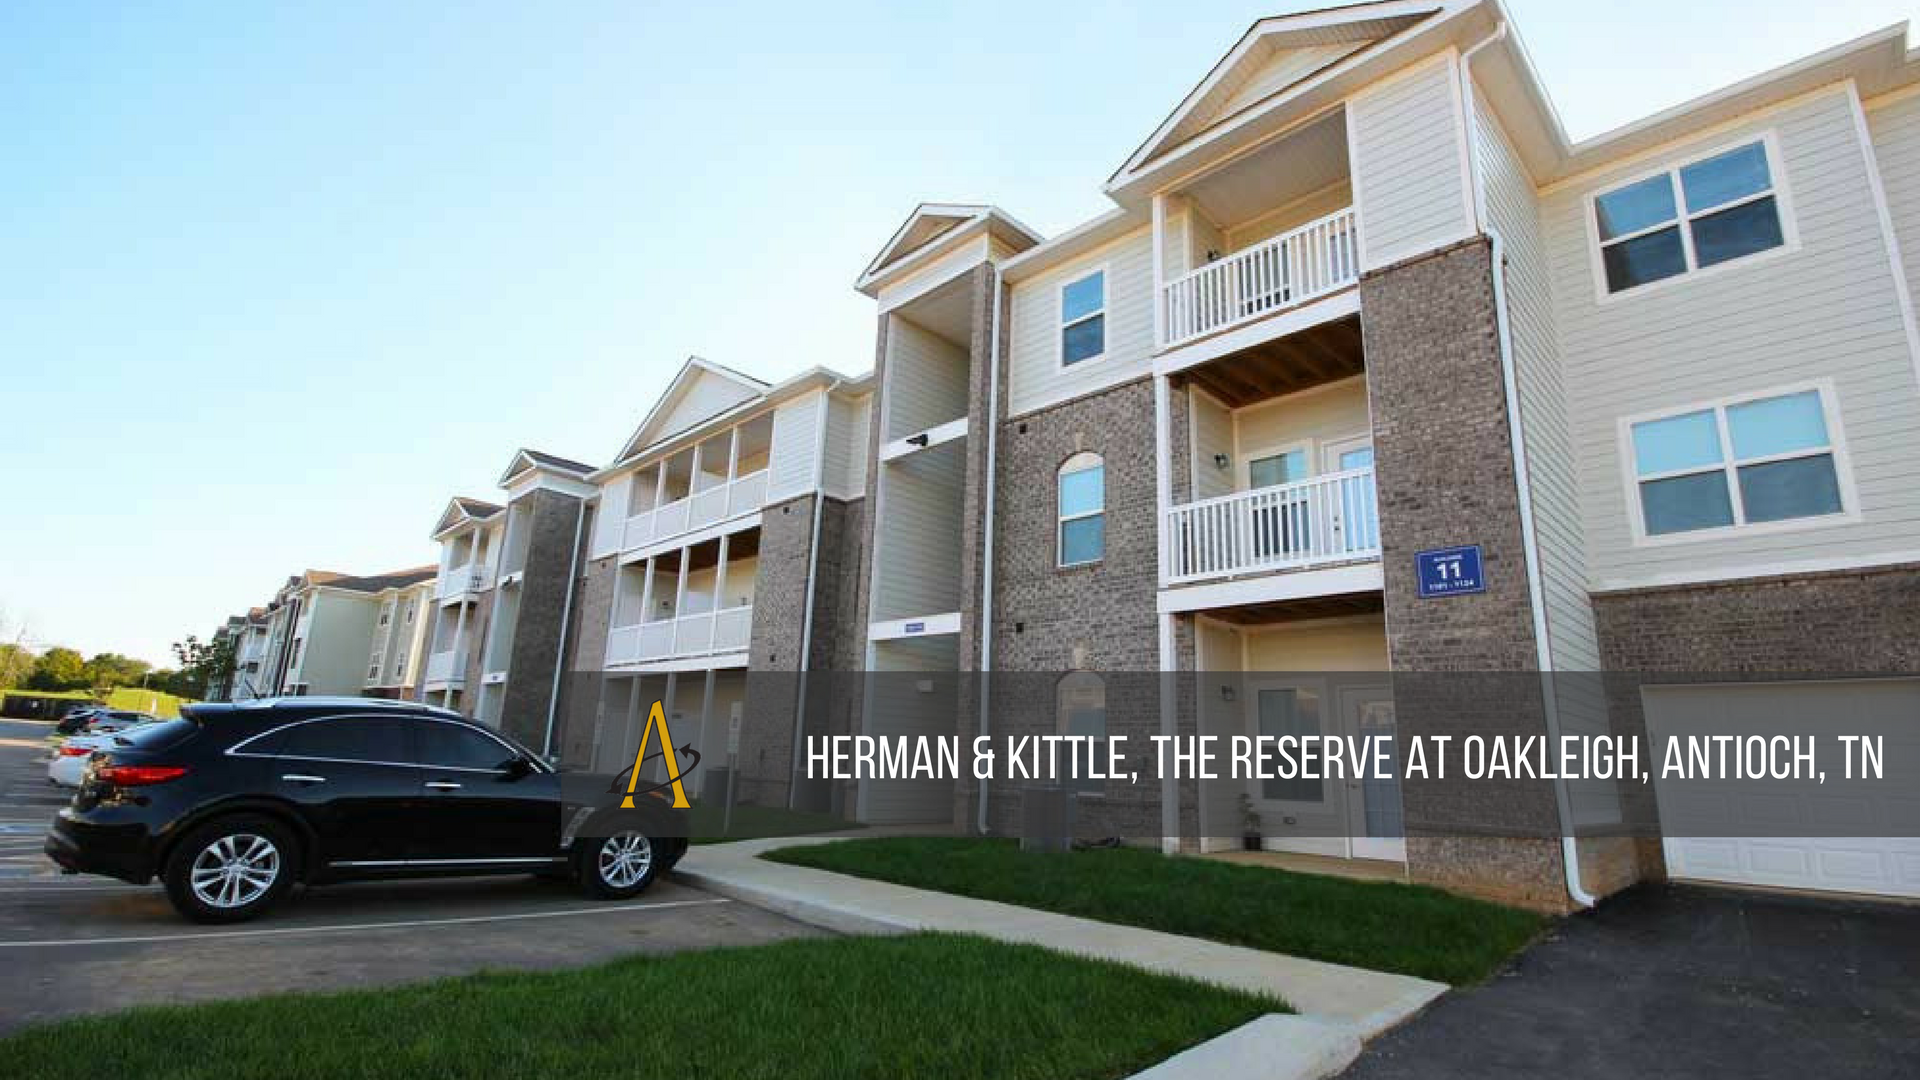 Herman & Kittle, The Reserve at Oakleigh, Antioch, TN